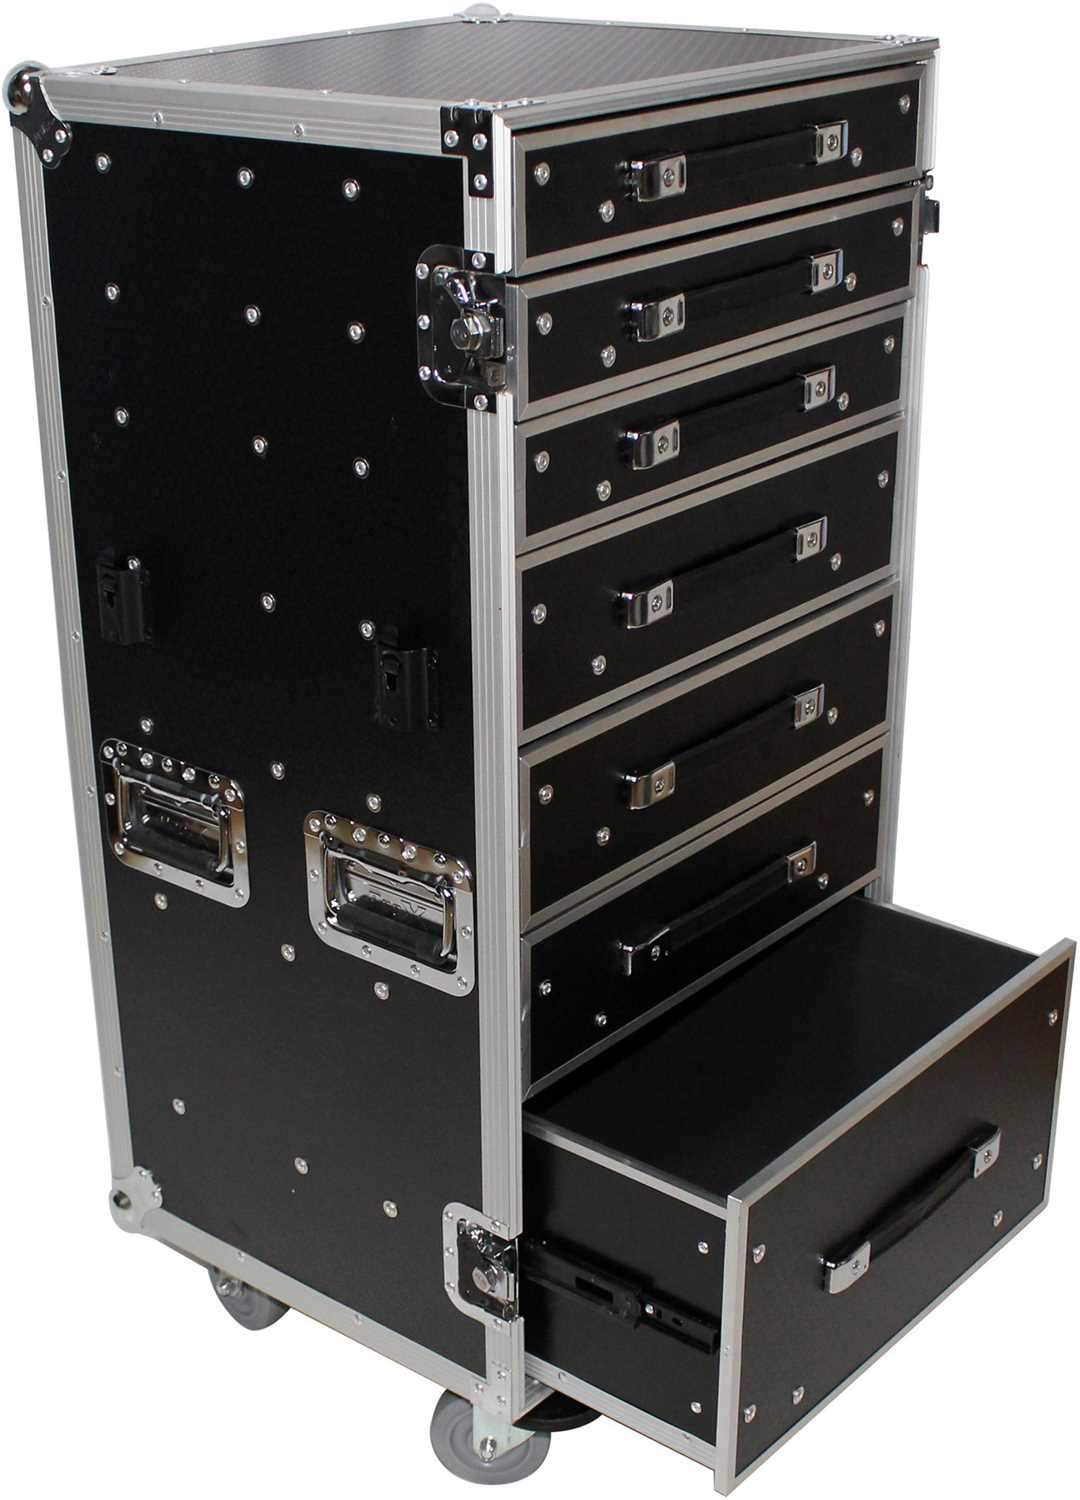 ProX XS-7DTW 7 Drawer ATA Workstation Case with Table - PSSL ProSound and Stage Lighting